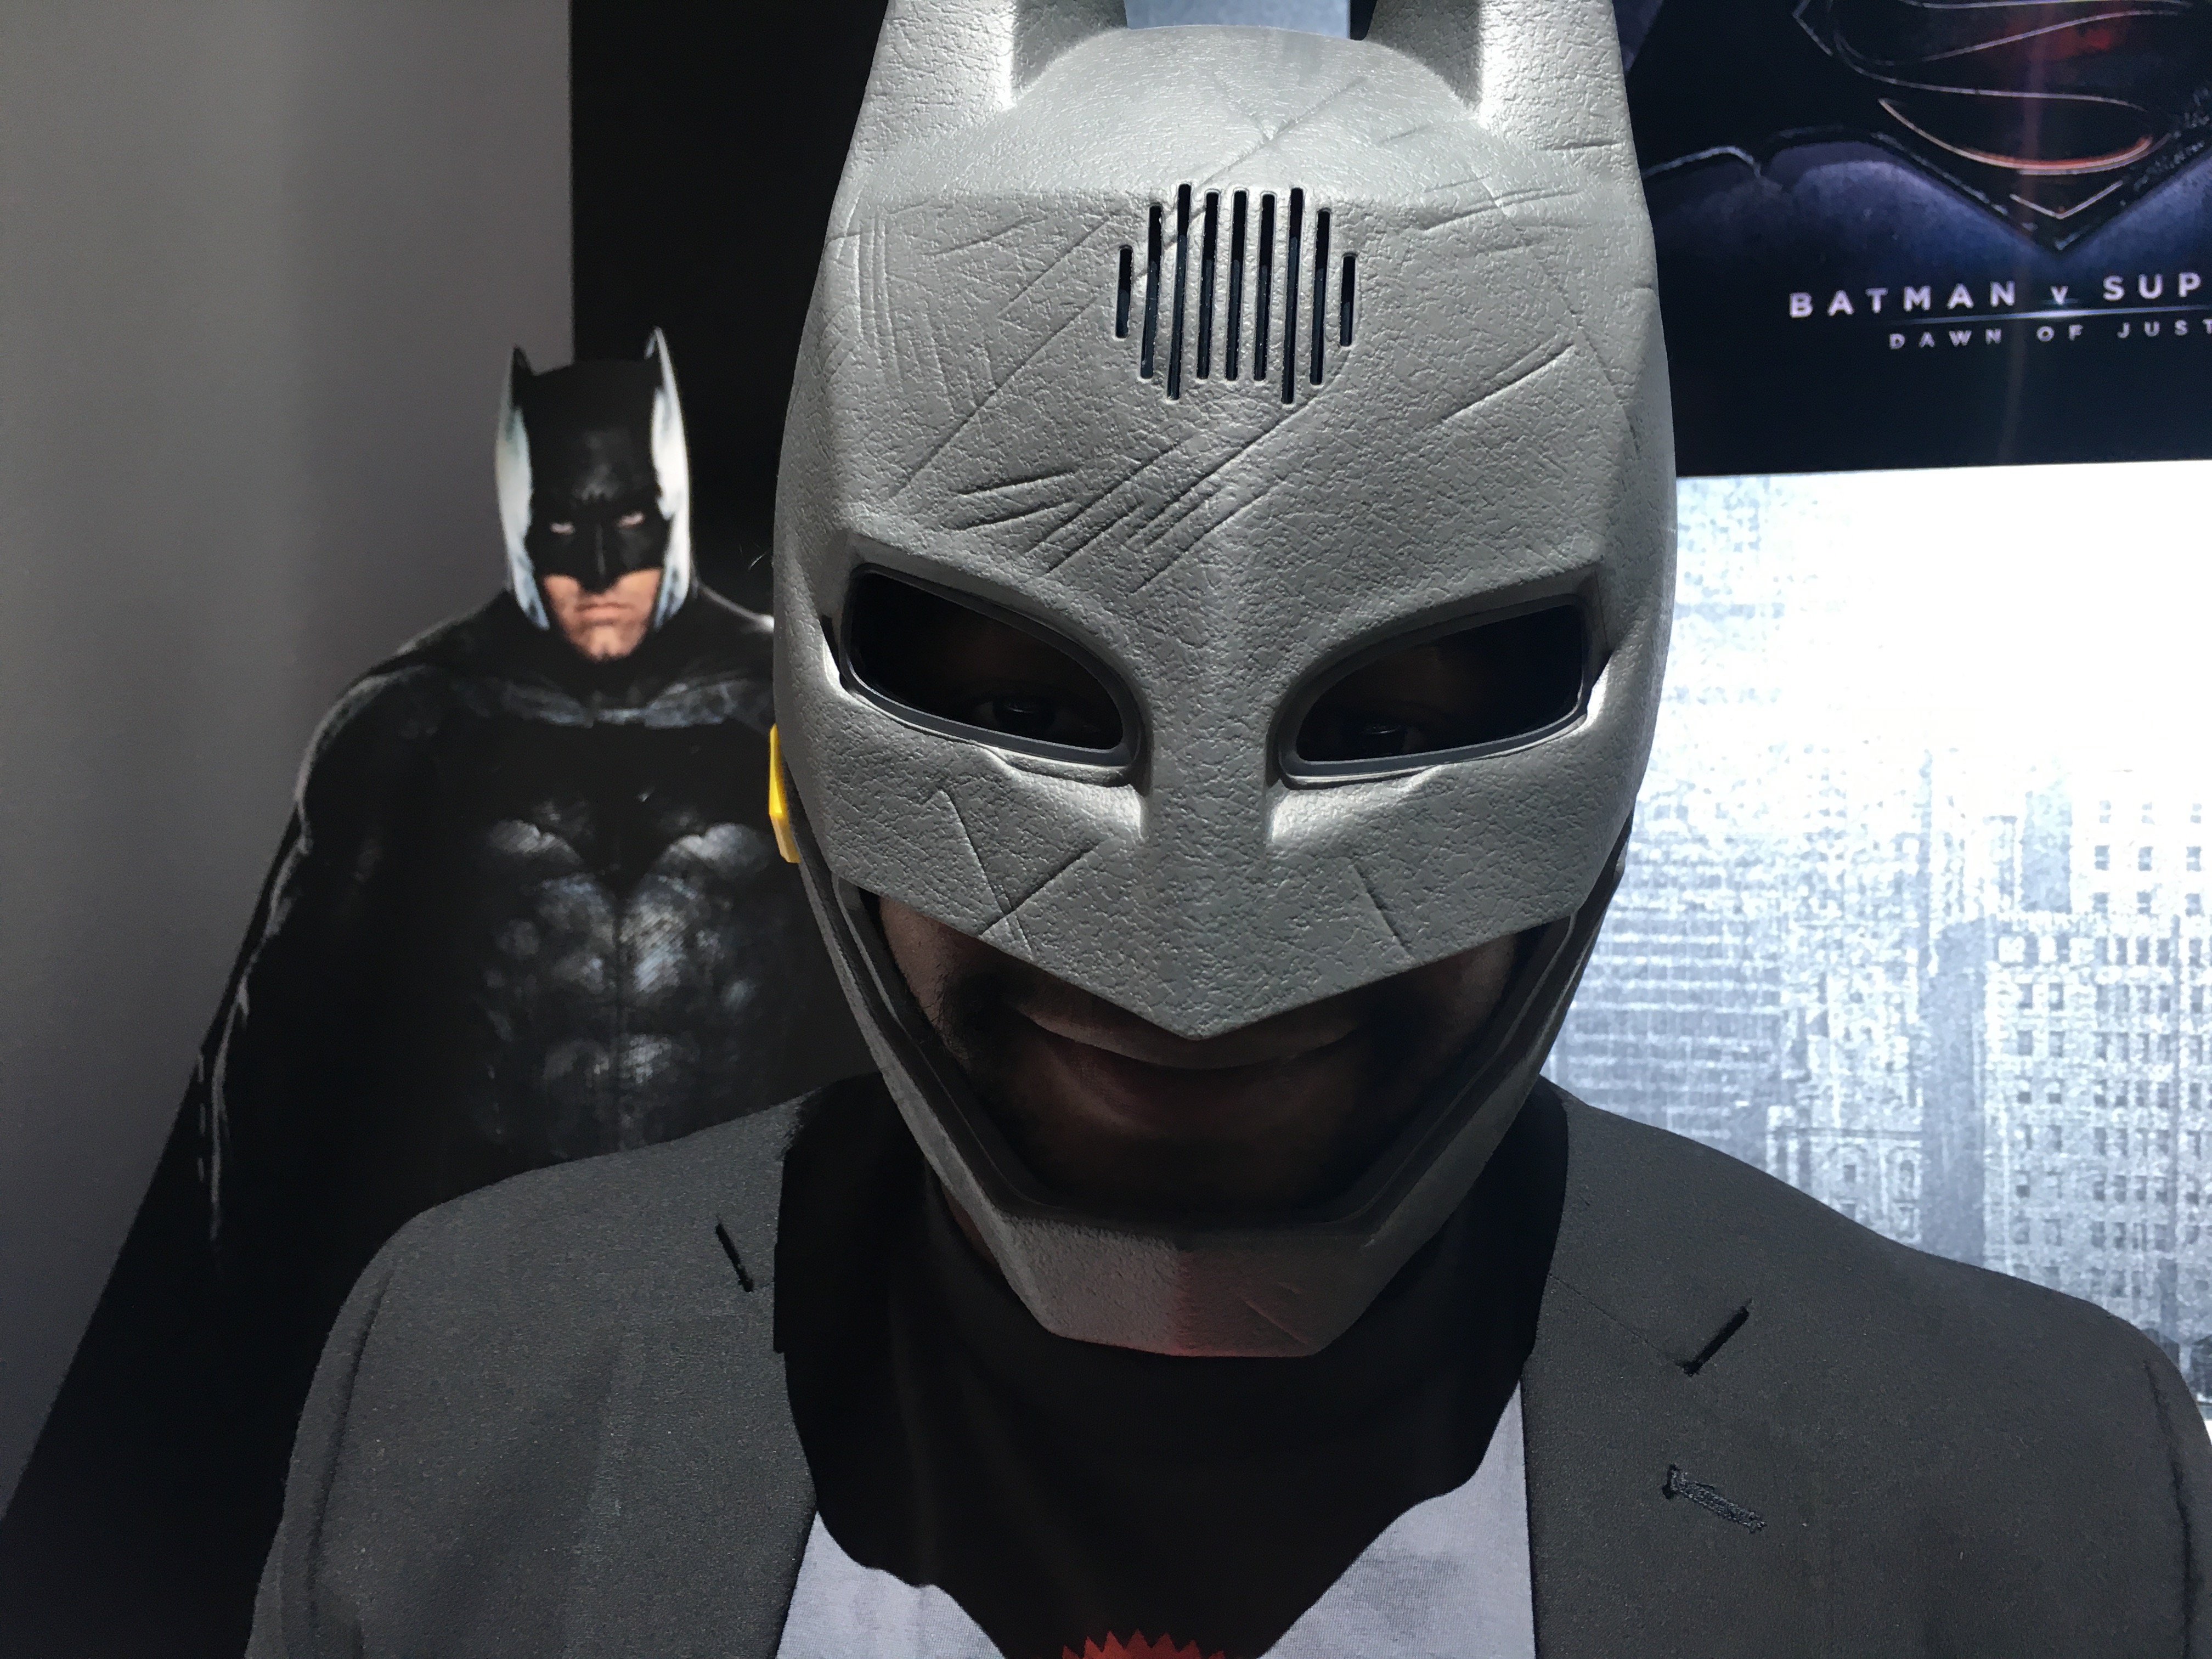 Batman voice-changing mask. I so want this. The outlines of the eyes light up too.